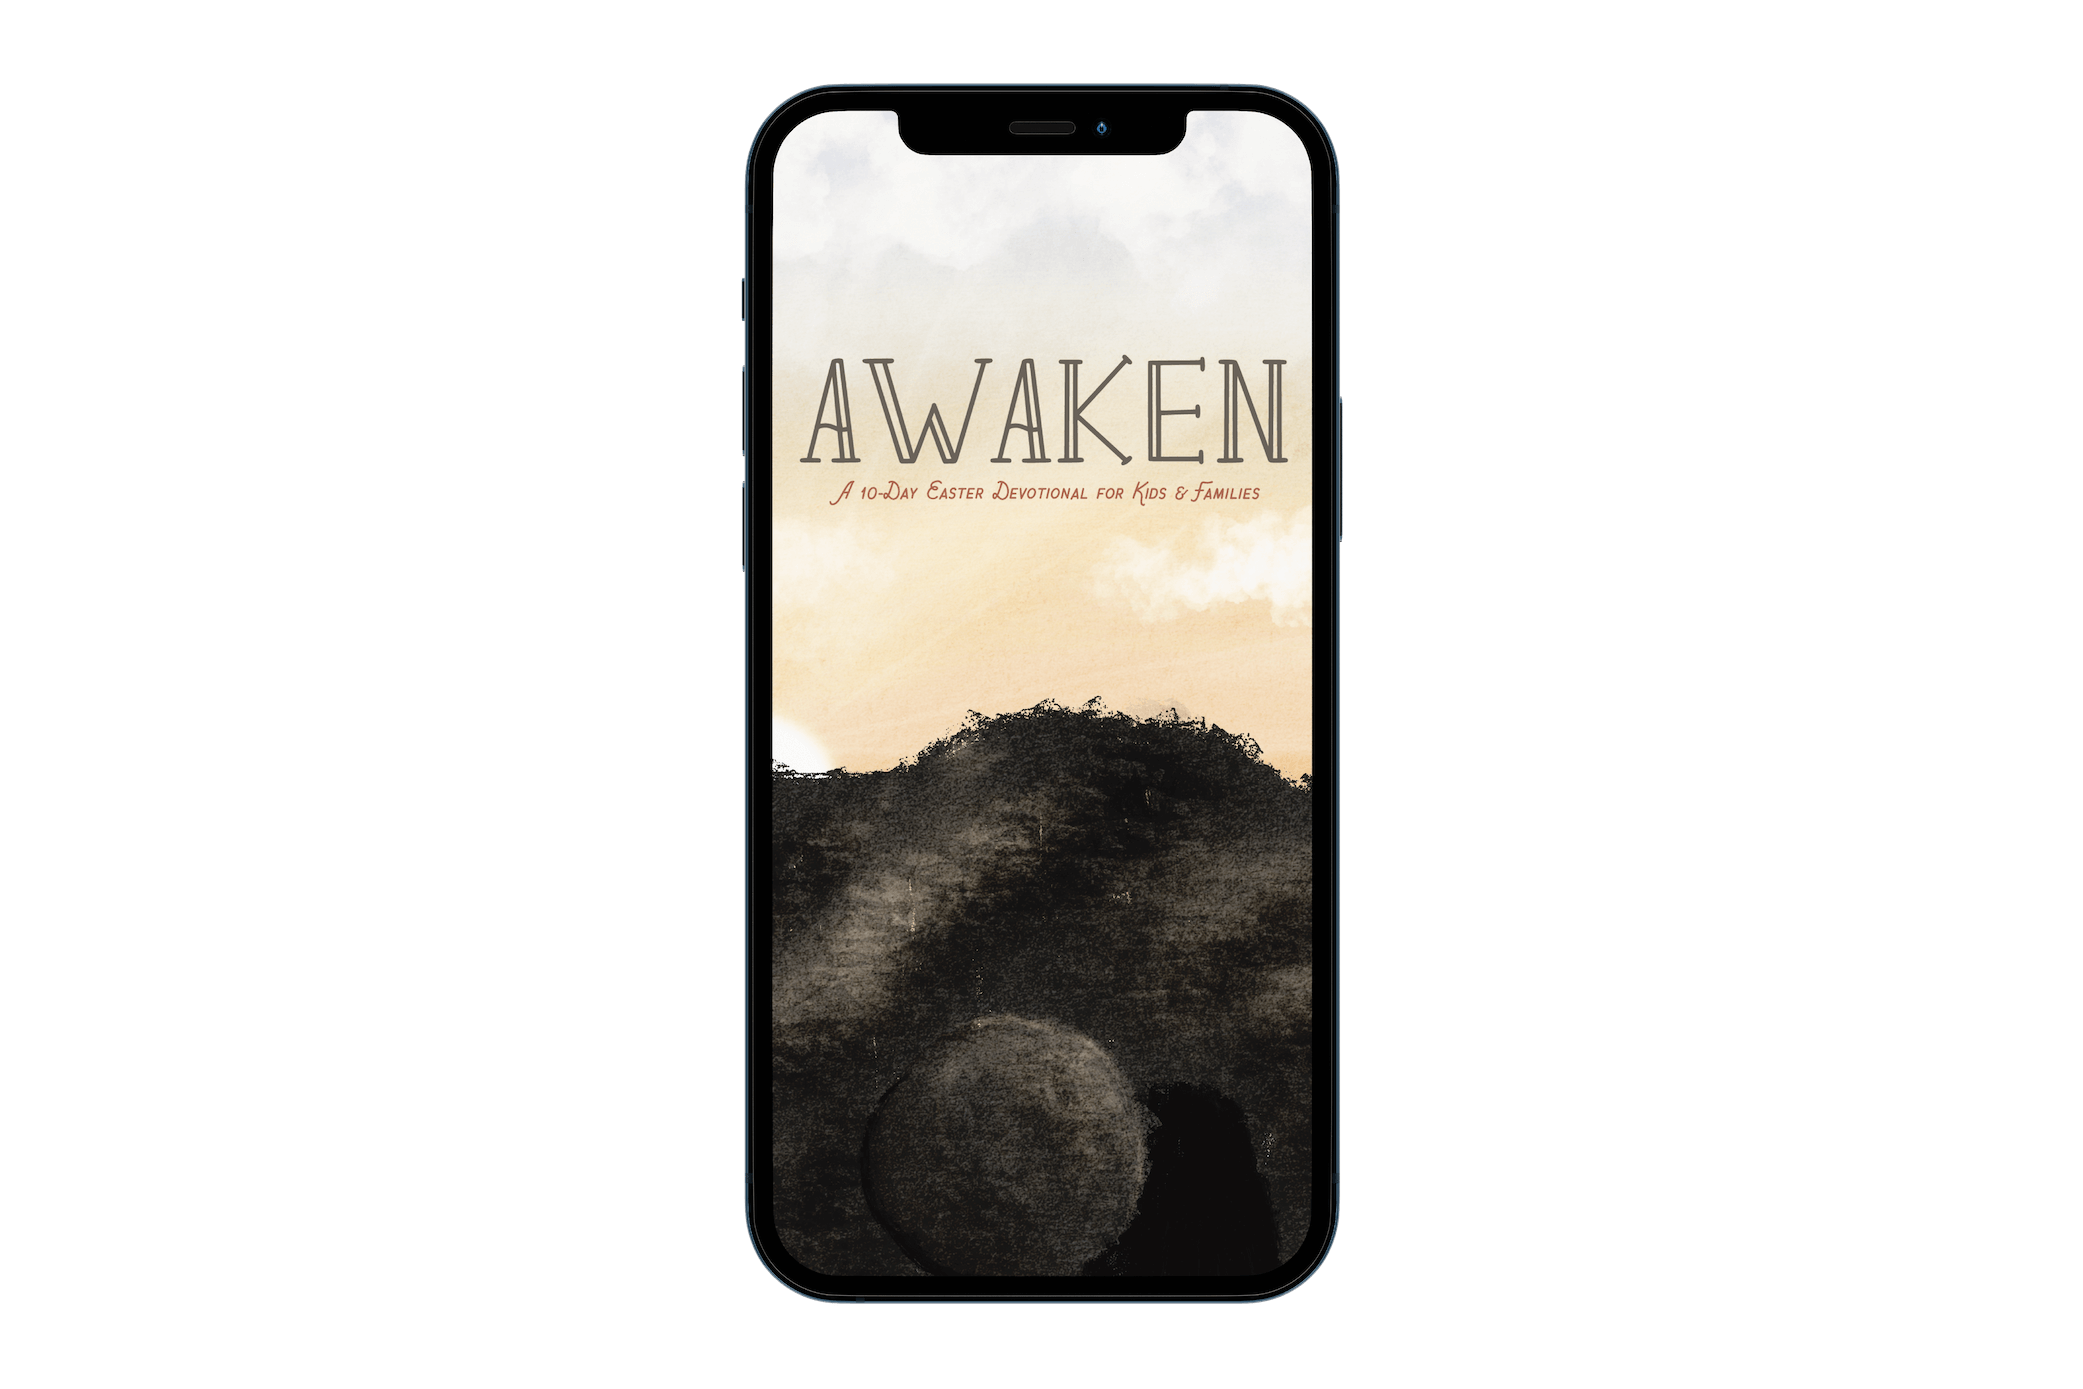 [DOWNLOADABLE VERSION] Awaken: A 10-Day Easter Devotional for Kids & Family